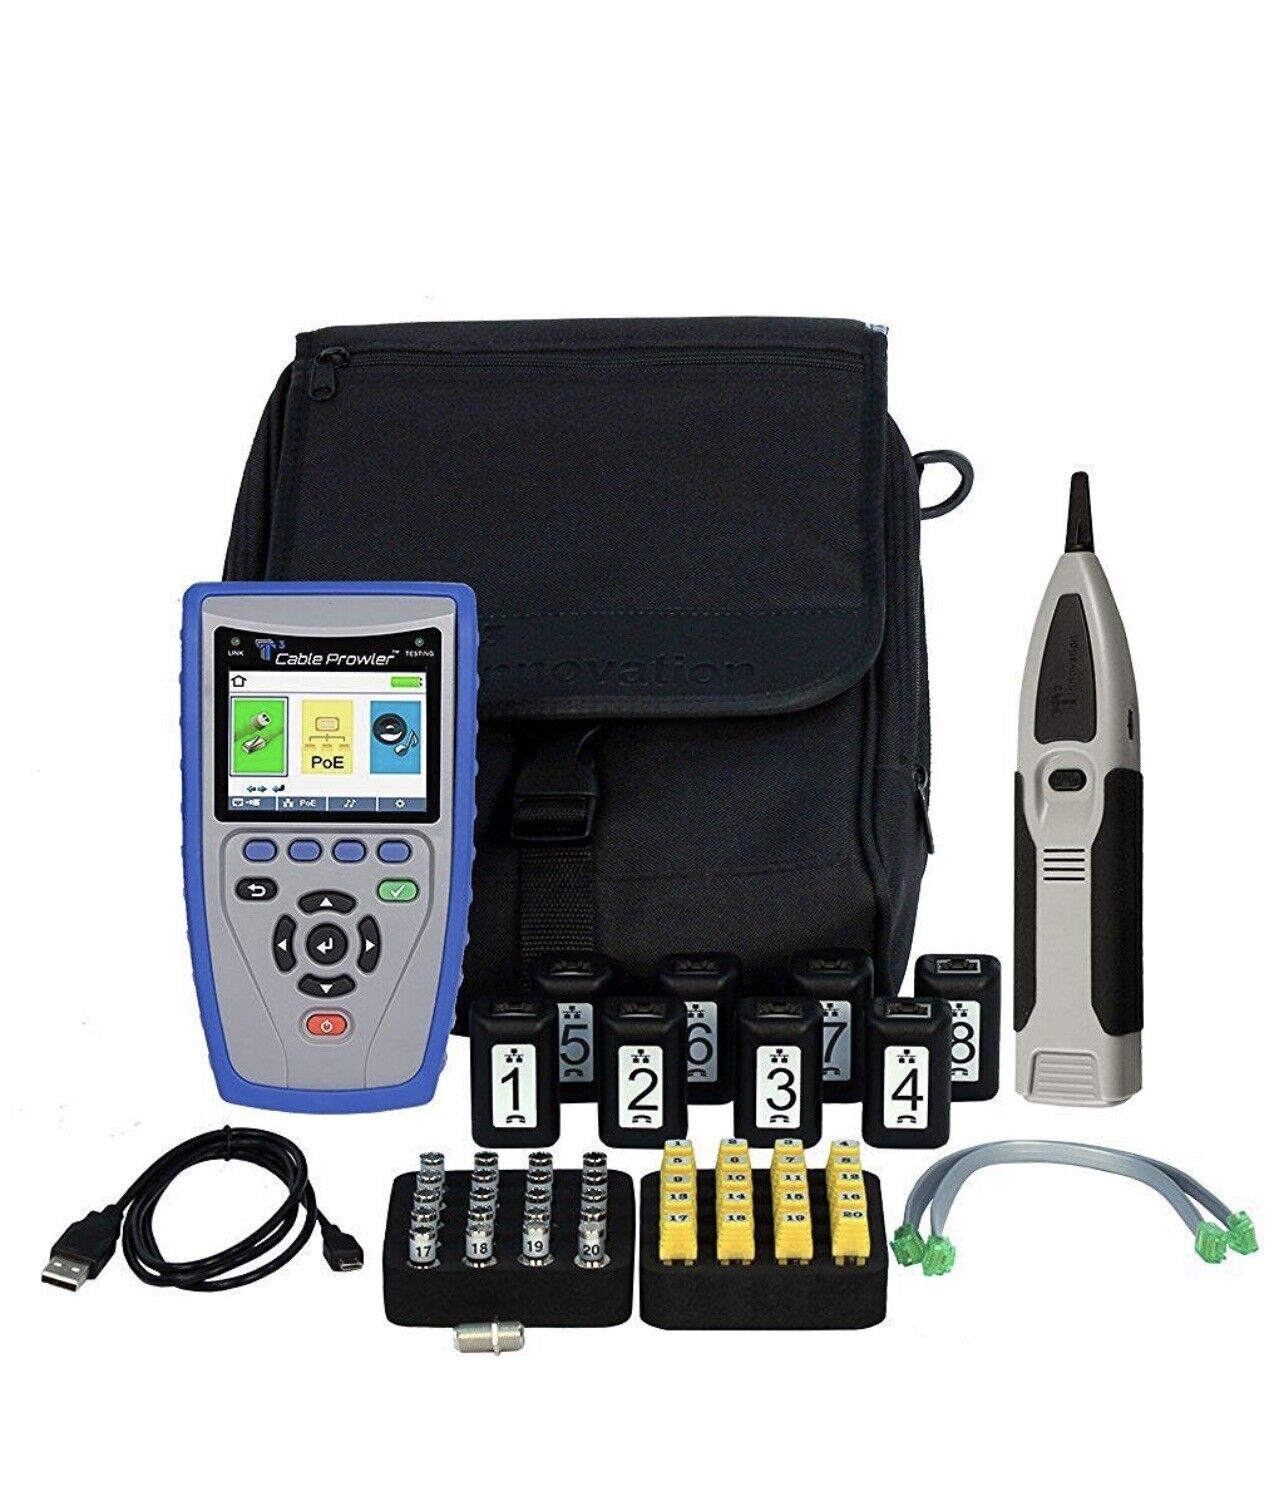 Network Cable Tester Kit with ID remotes, Tone Probe, PoE, RJ45 CAT6, CAT7, CAT8